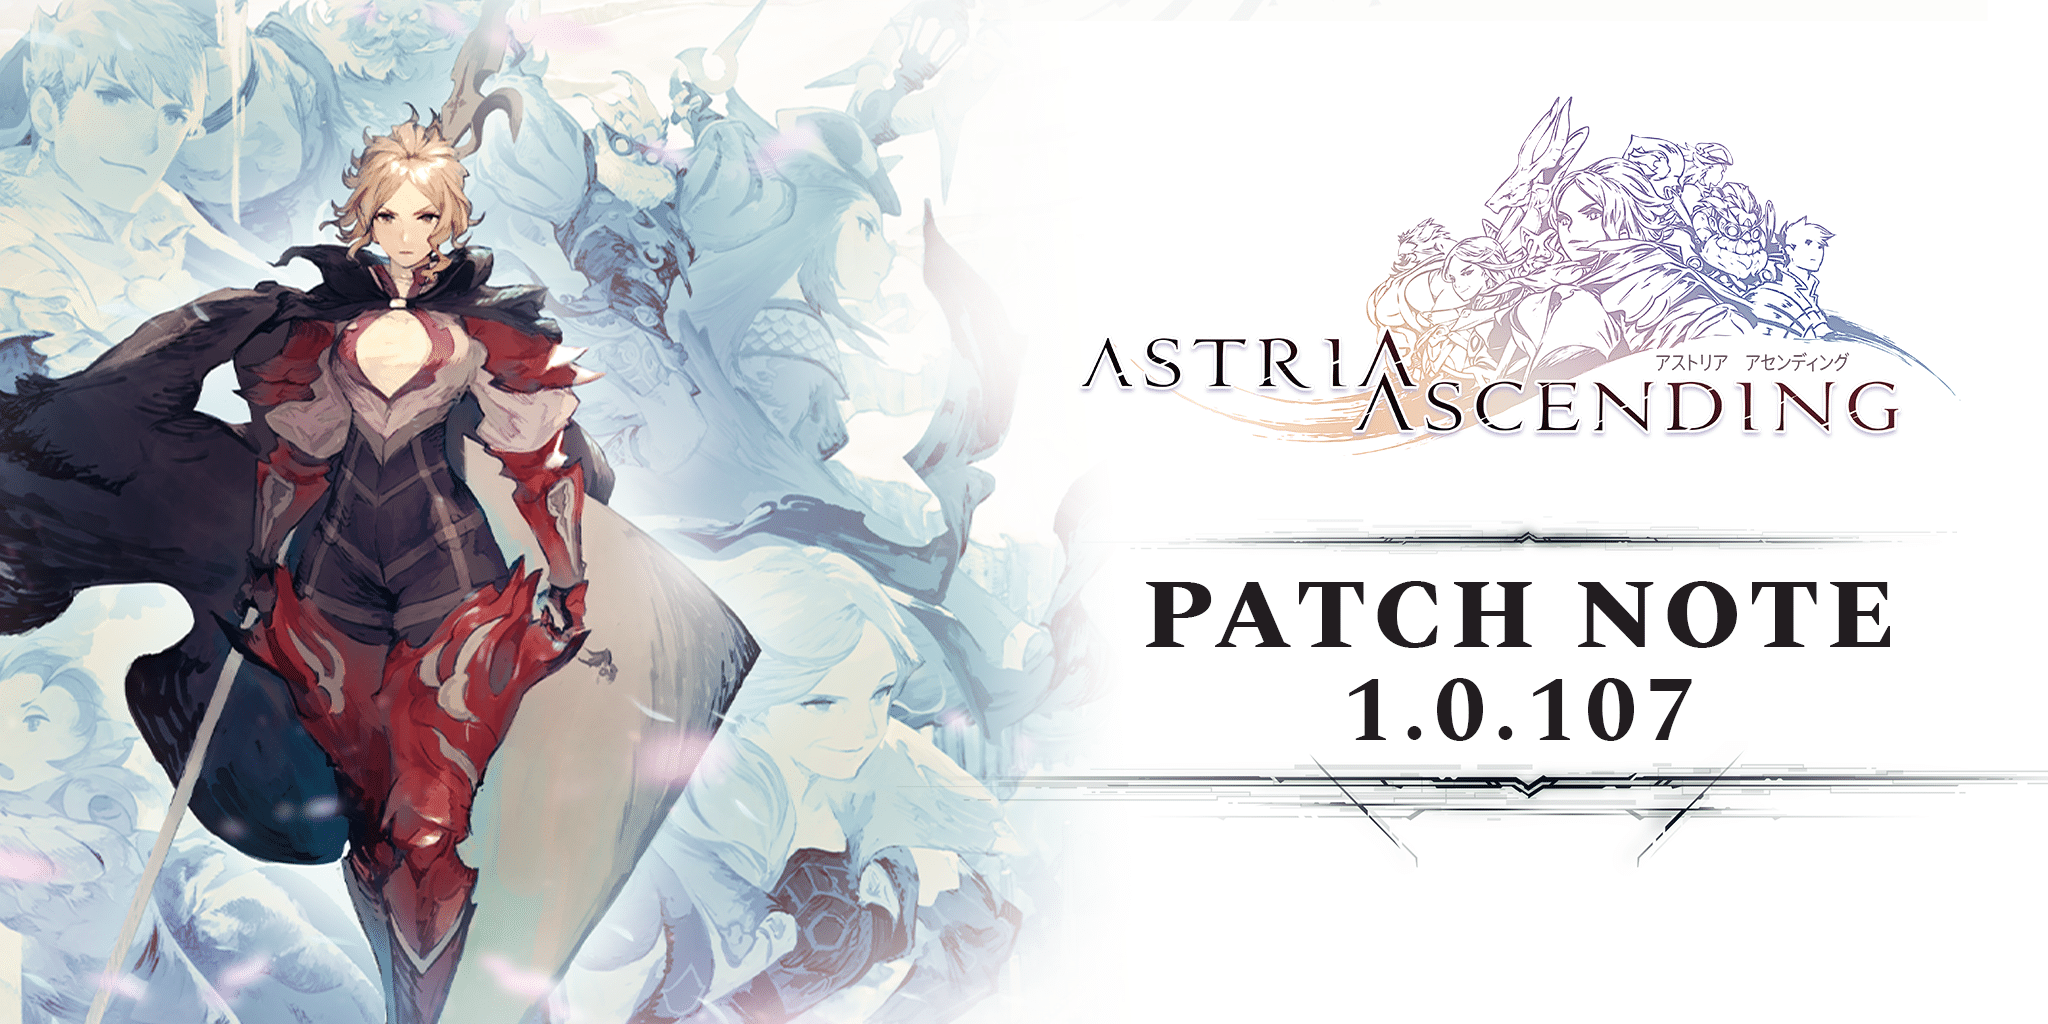 Astria Ascending Patch Note 1.0.107 detailed